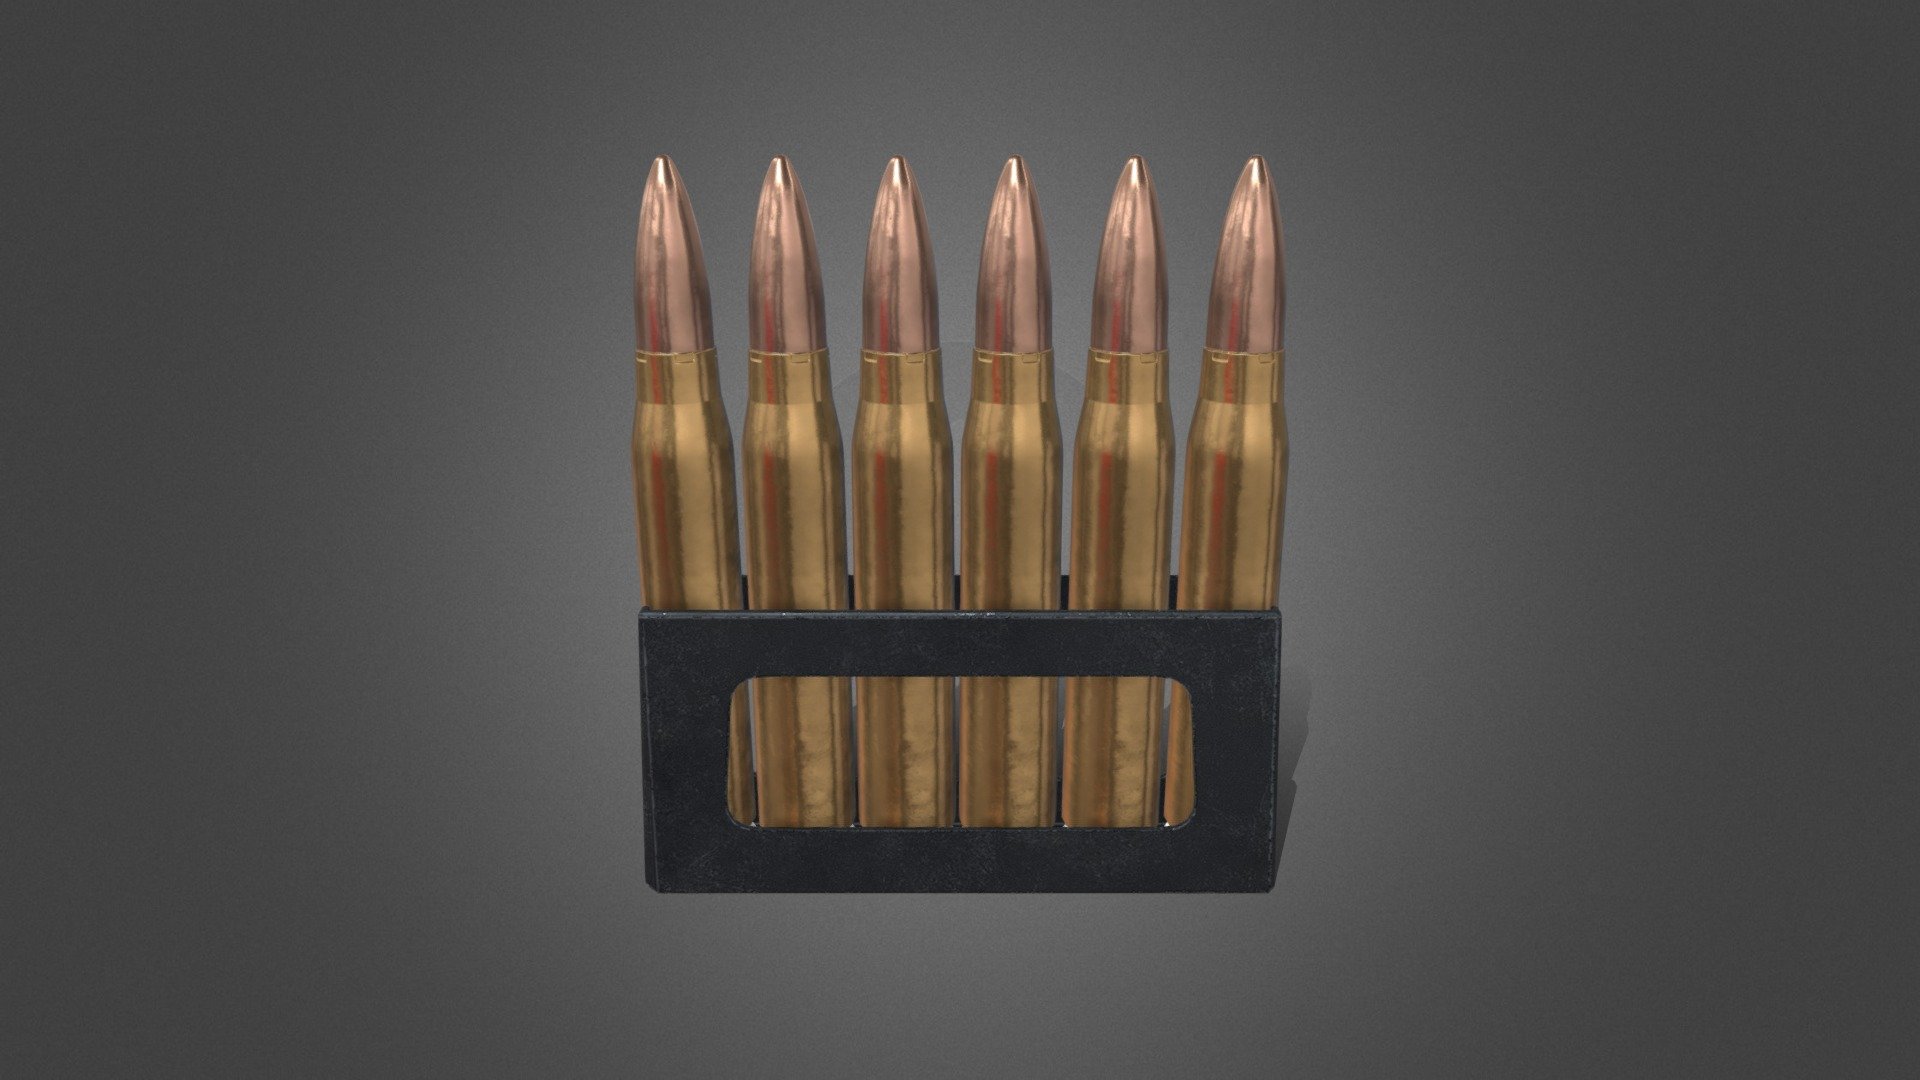 used during World War II 7.35×51mm carcano bullets and clip - Bullet 7.35×51mm carcano - Download Free 3D model by CN08 3d model